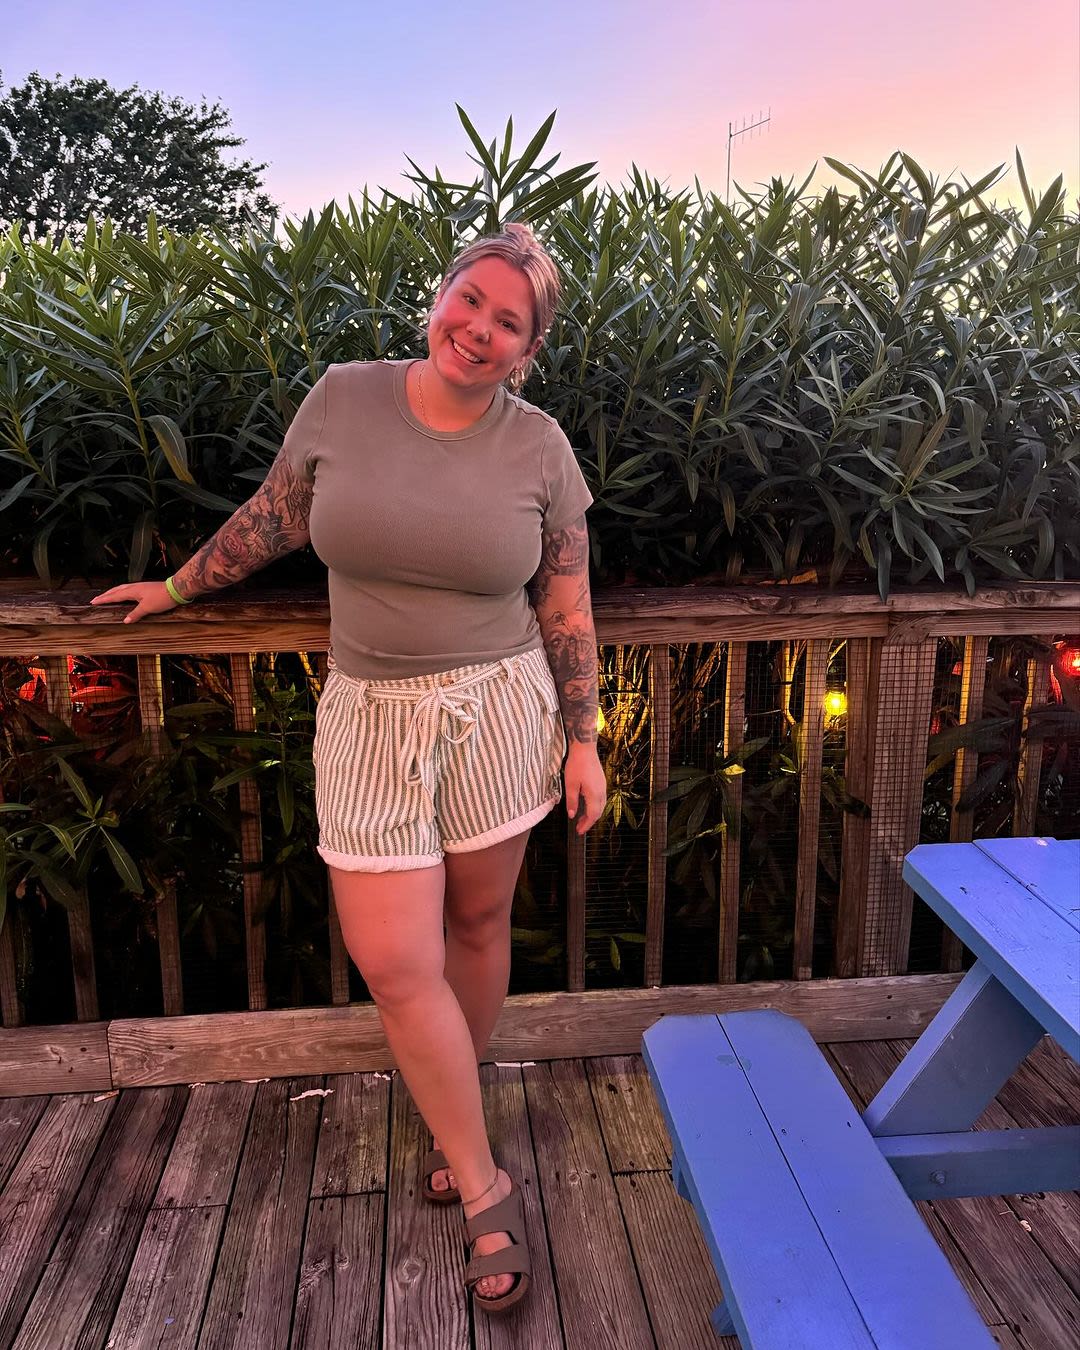 Teen Mom Star Kailyn Lowry Reveals That She Purchased ‘20 Acres of Land’ in Delaware